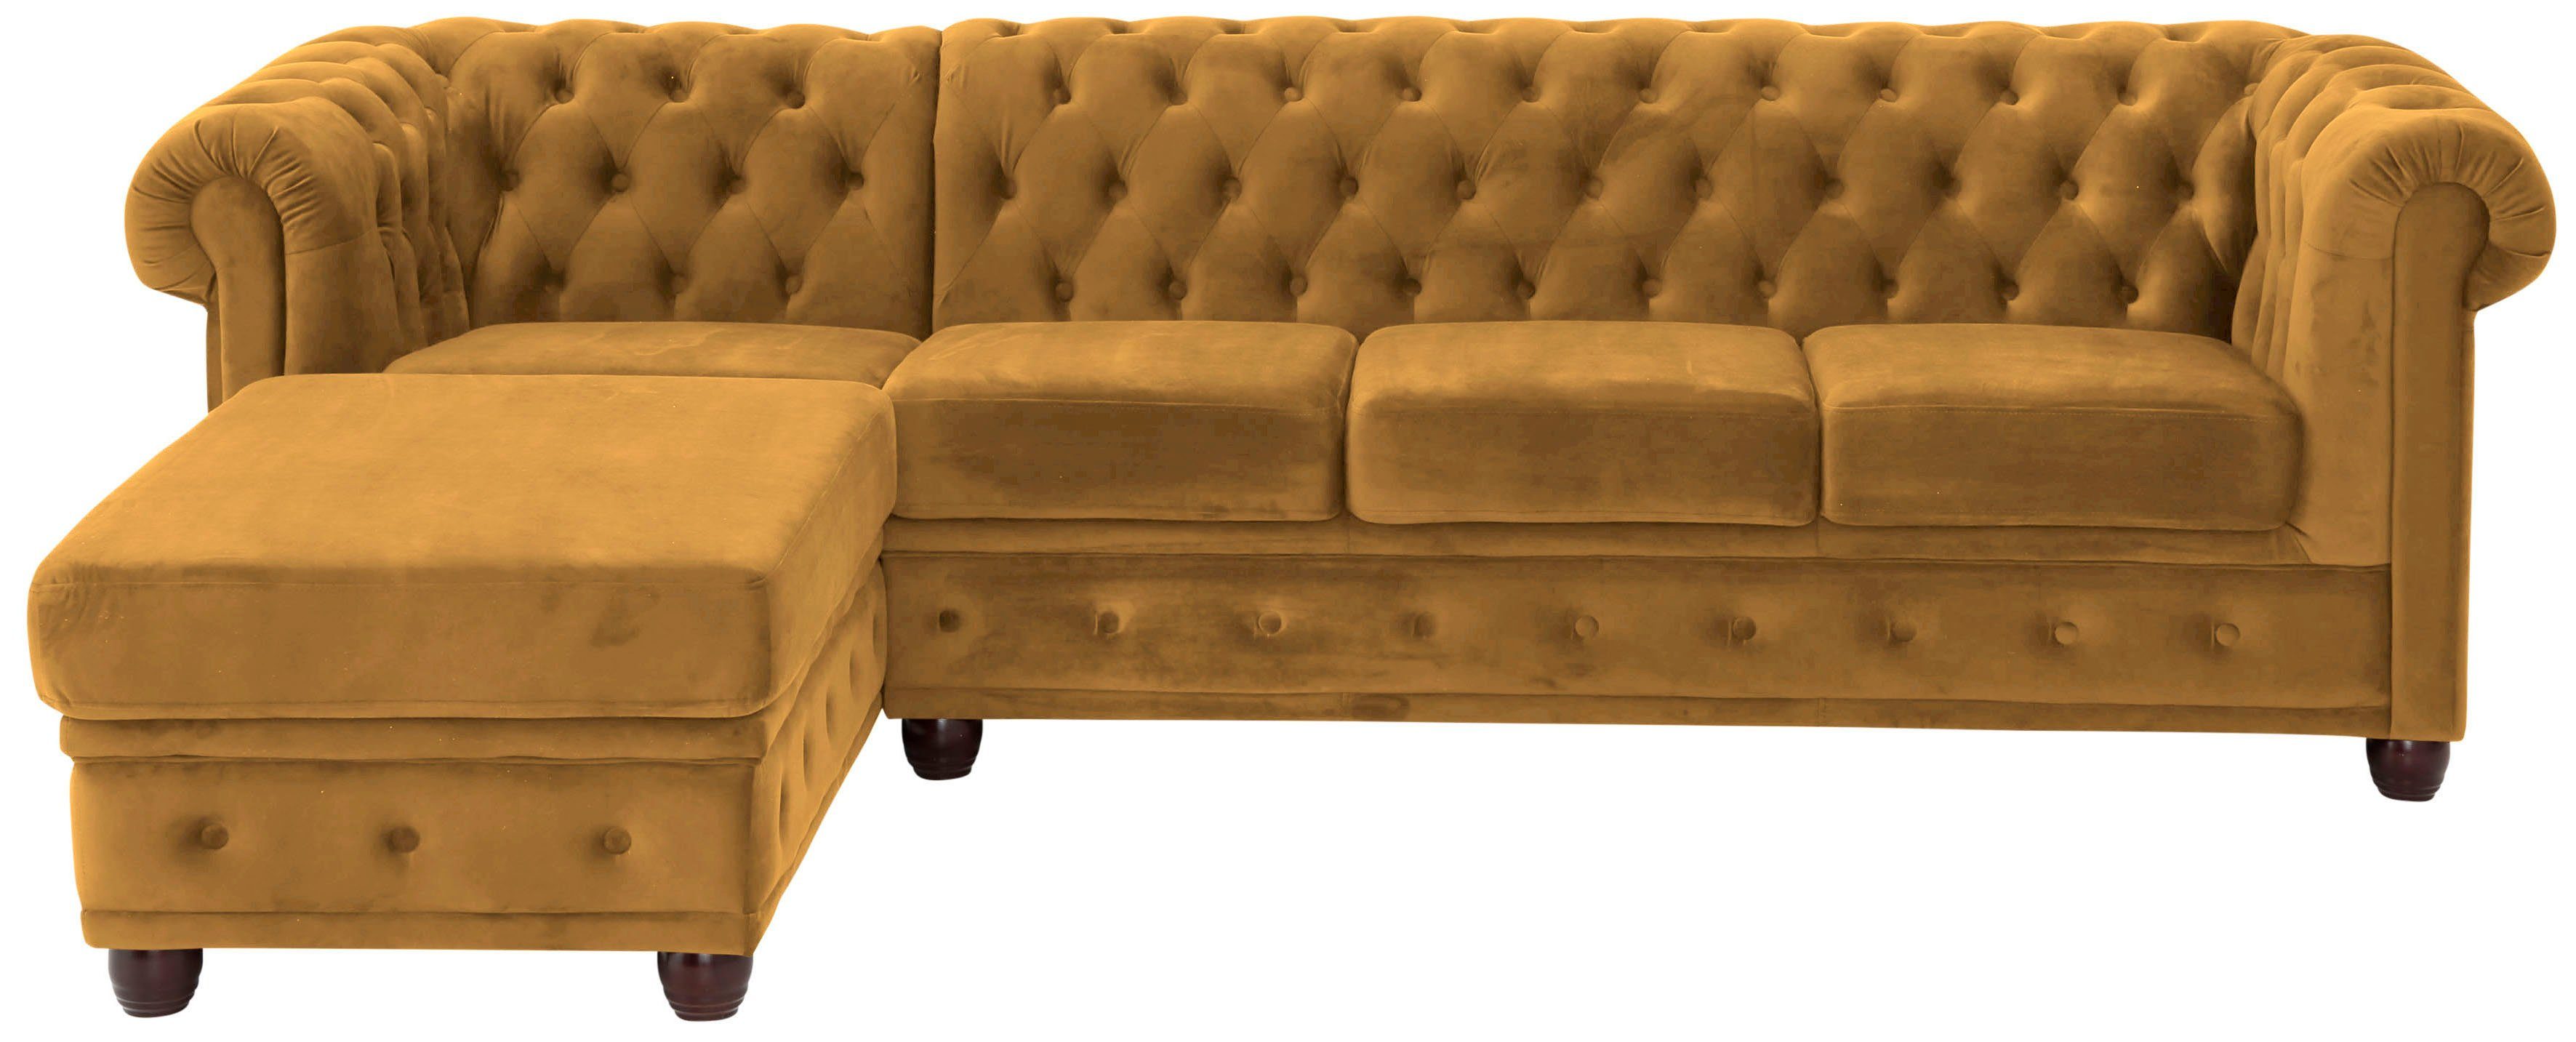 home affaire chesterfield-bank new castle hoogwaardige capitonnage in chesterfield-design, bxdxh: 255(171x72) geel